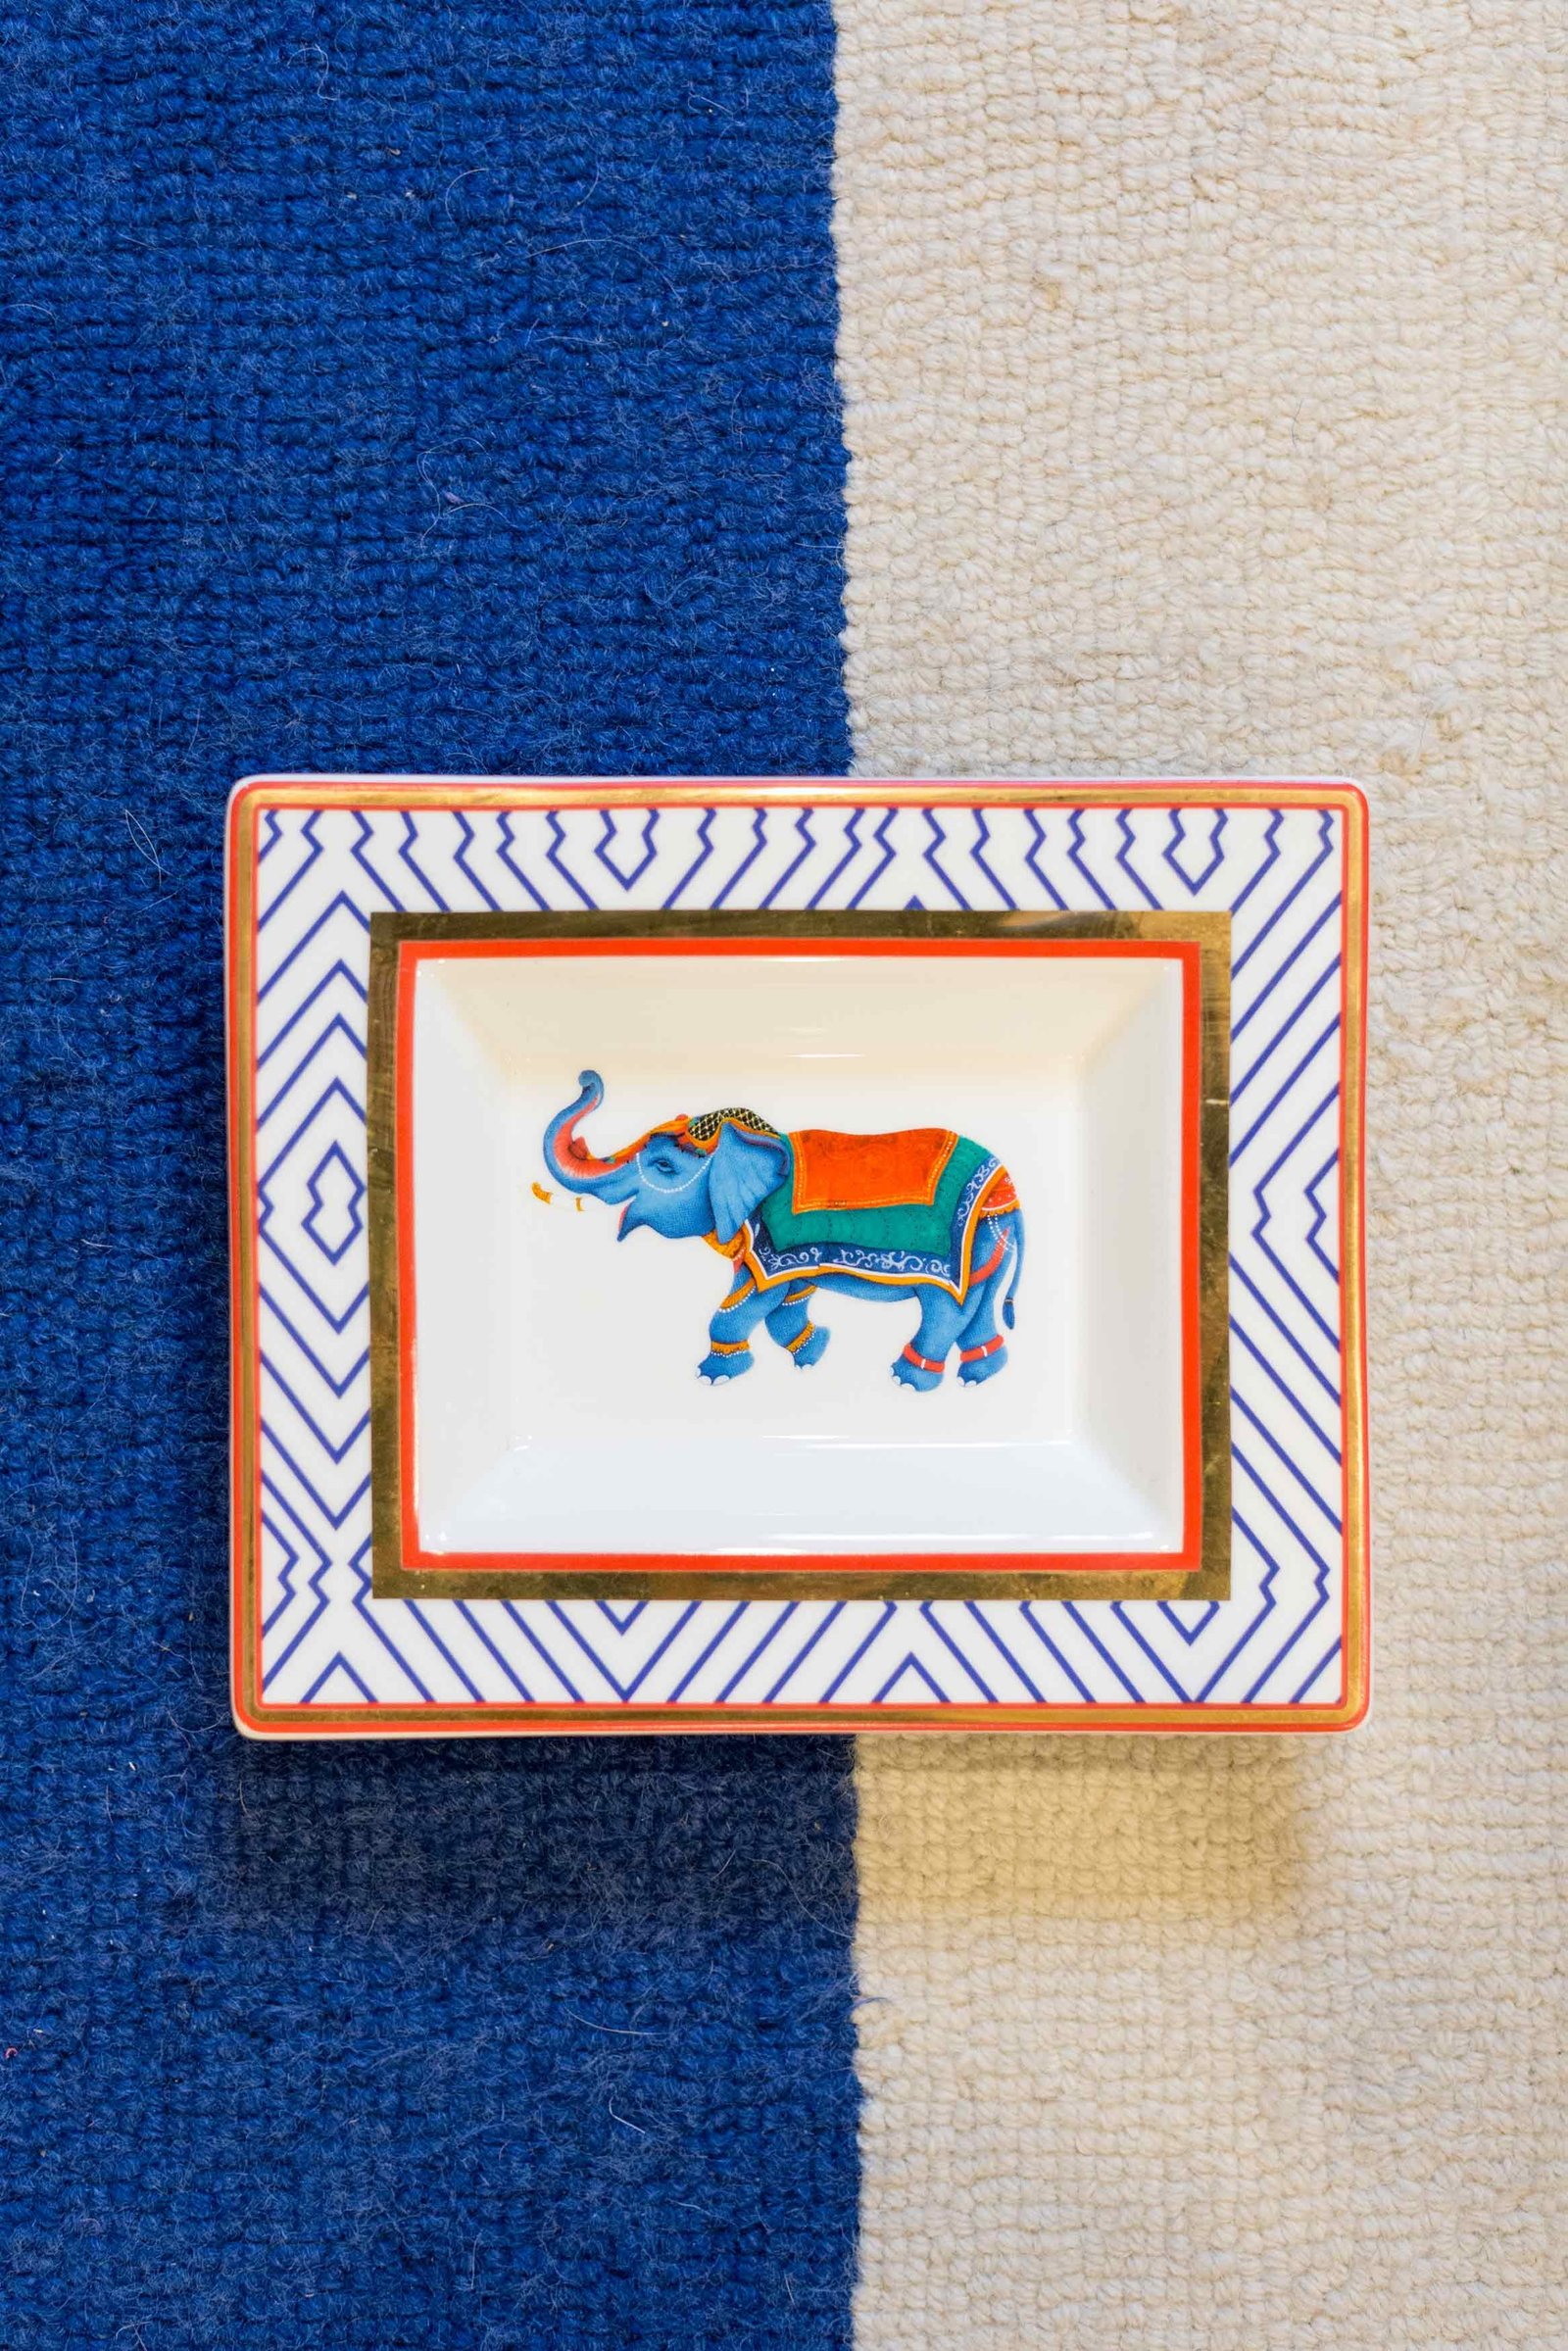 A ceramic dish with an elephant on top of a blue and white rug.